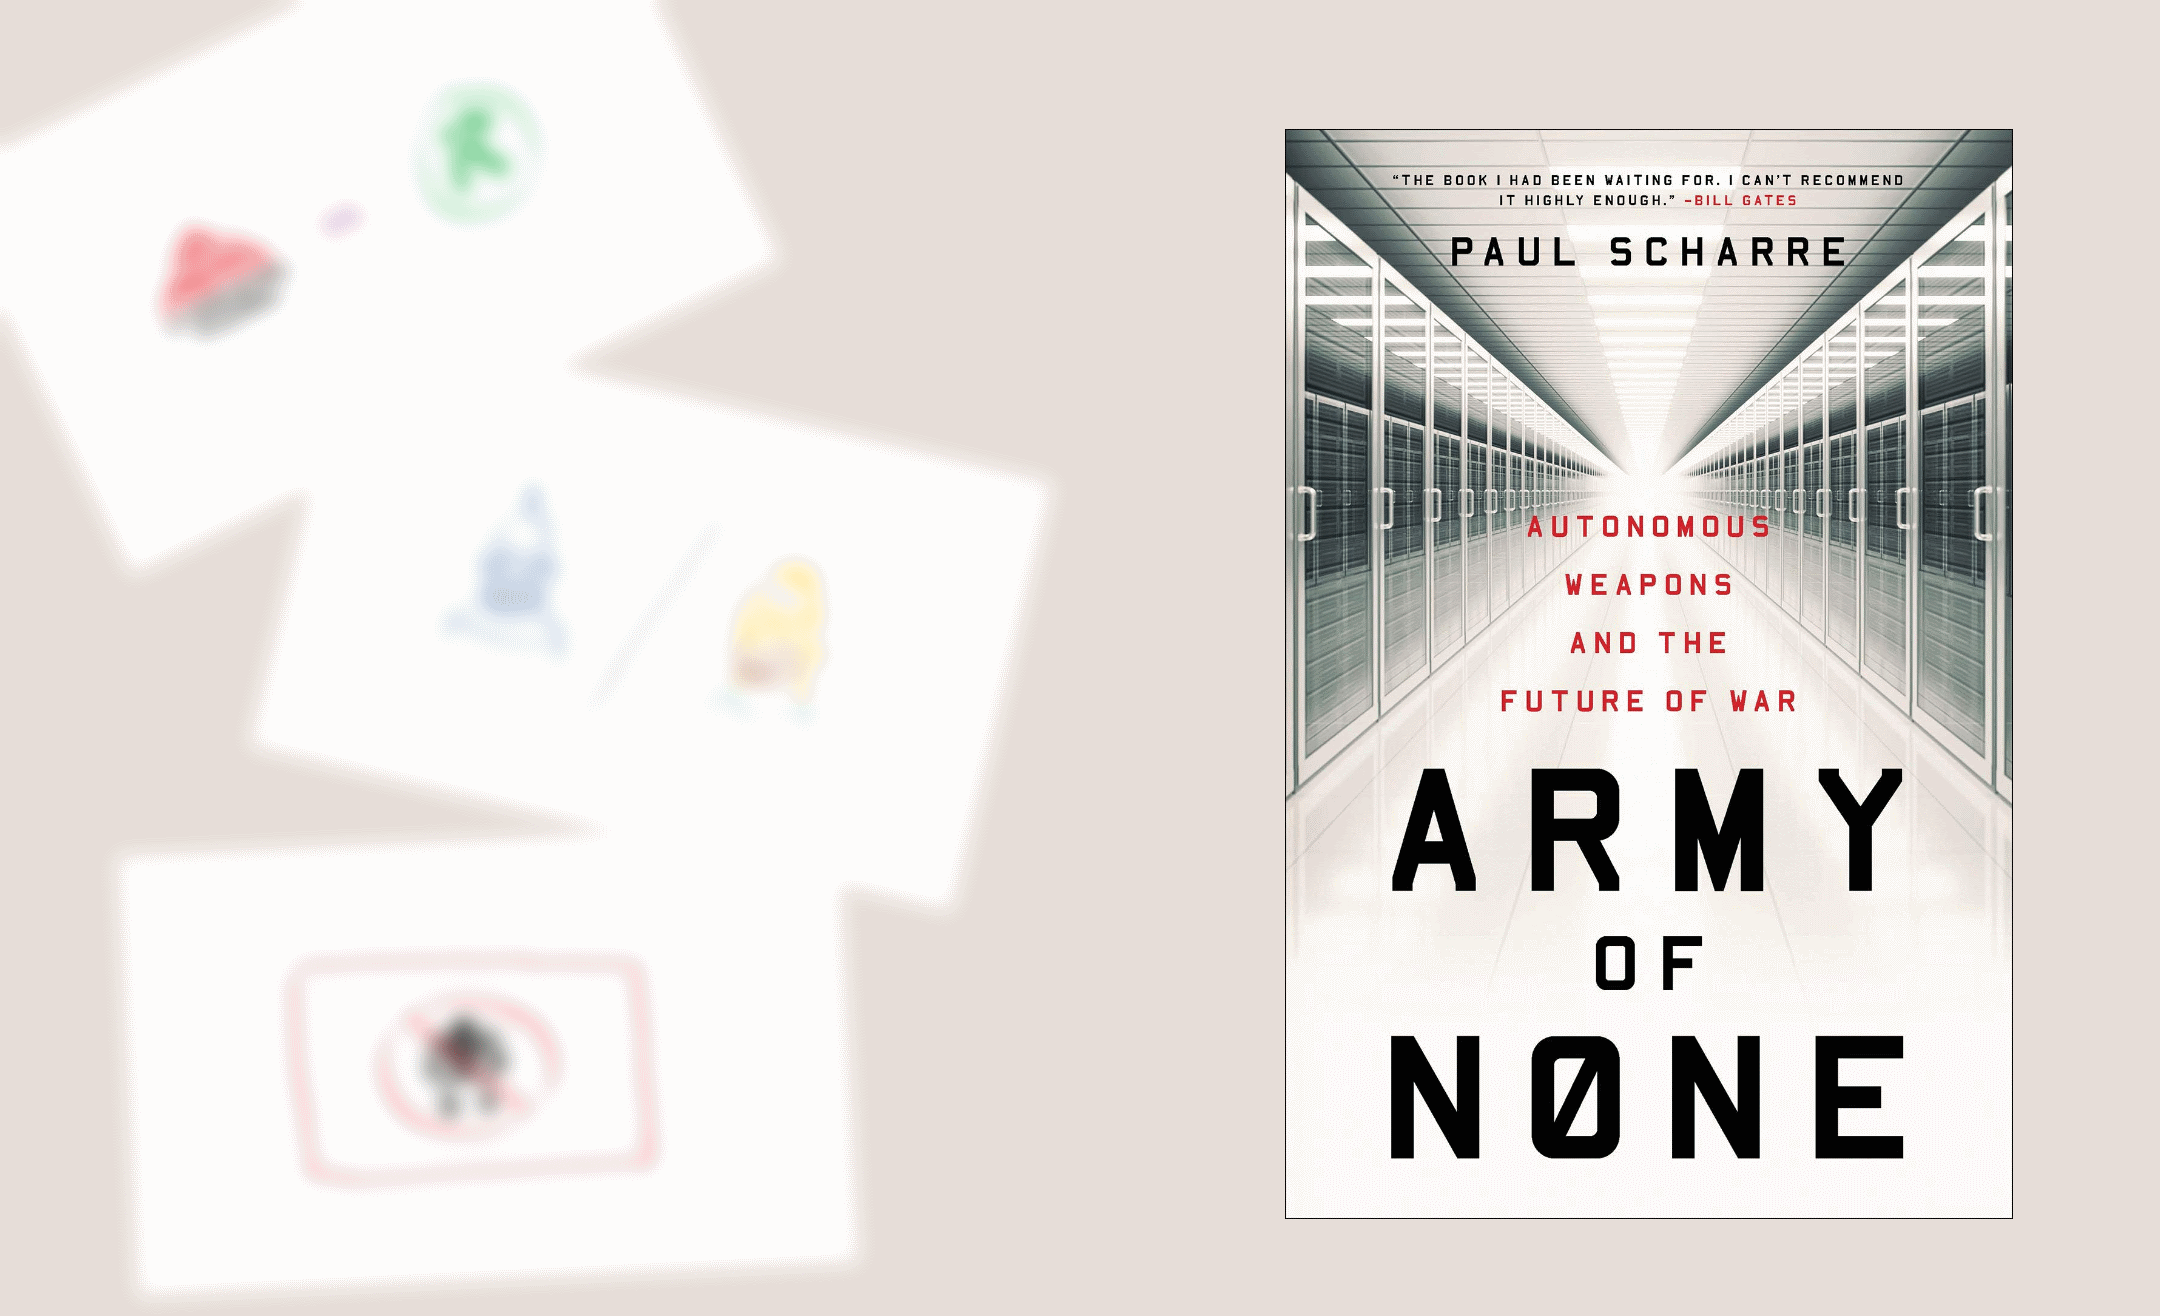 Notes on “Army of None” by Paul Scharre (Book Review)